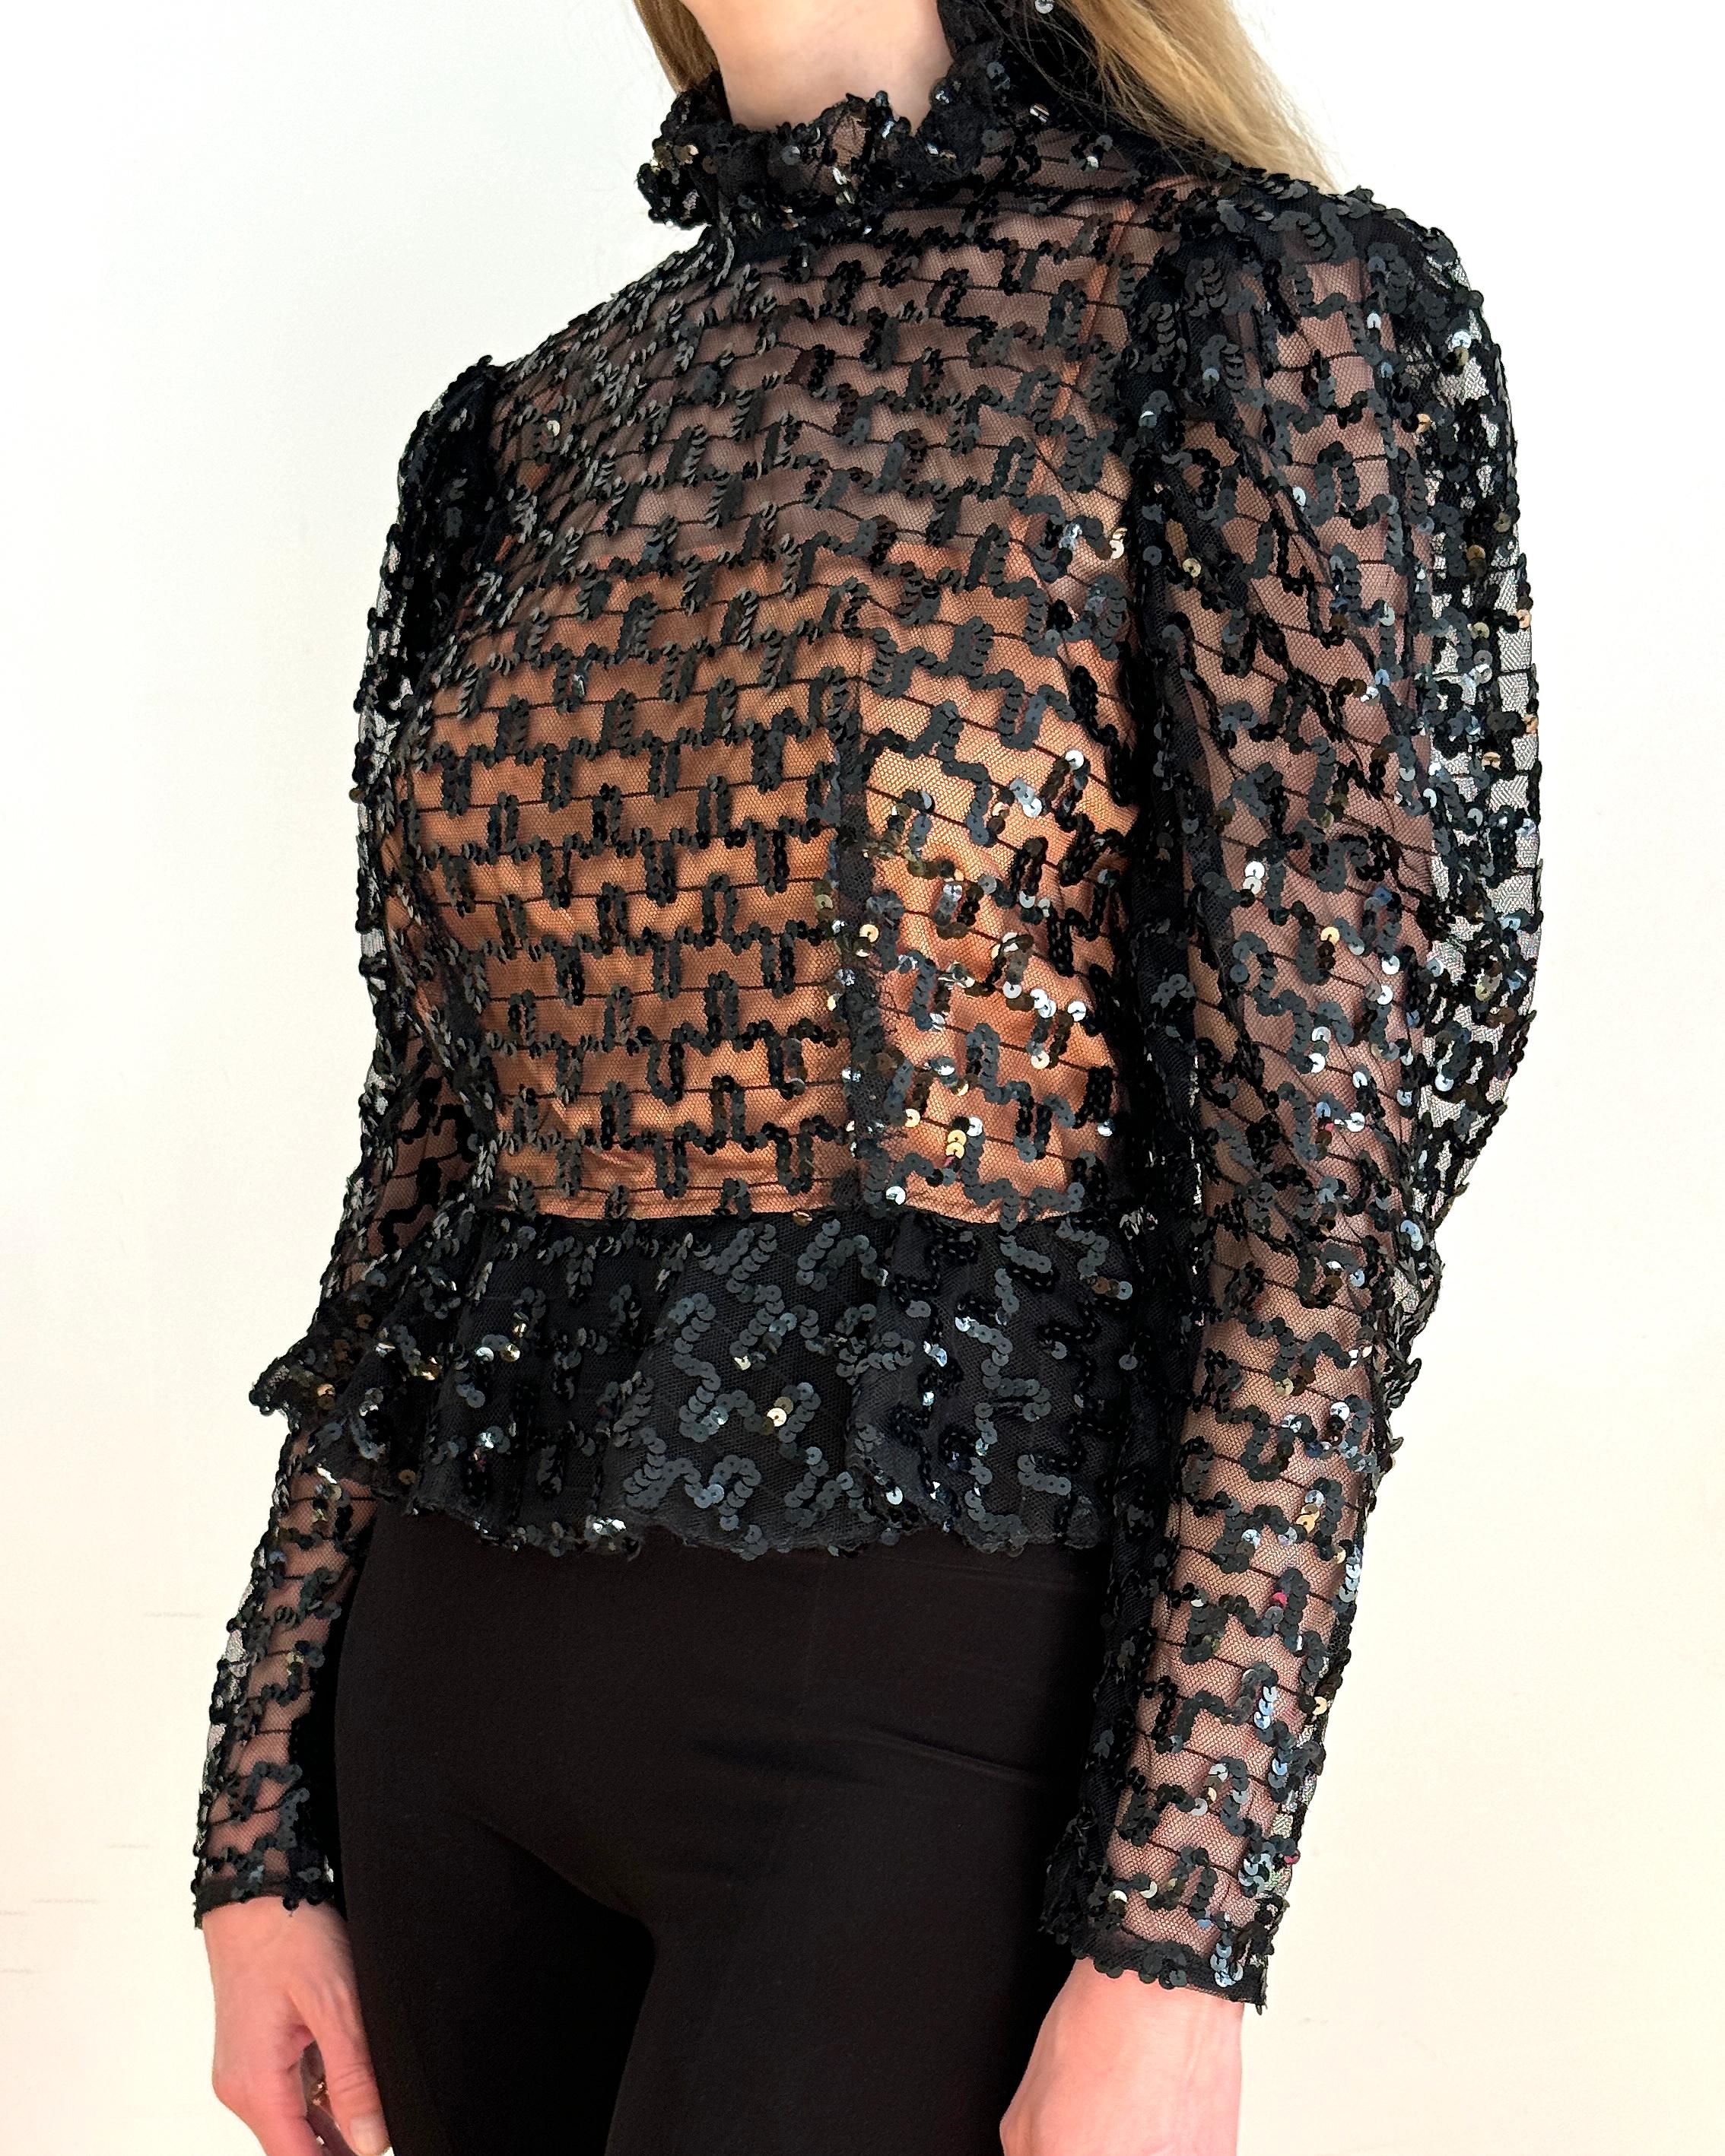 VINTAGE 1970s BLACK SEQUIN PEPLUM BLOUSE In Good Condition For Sale In New York, NY